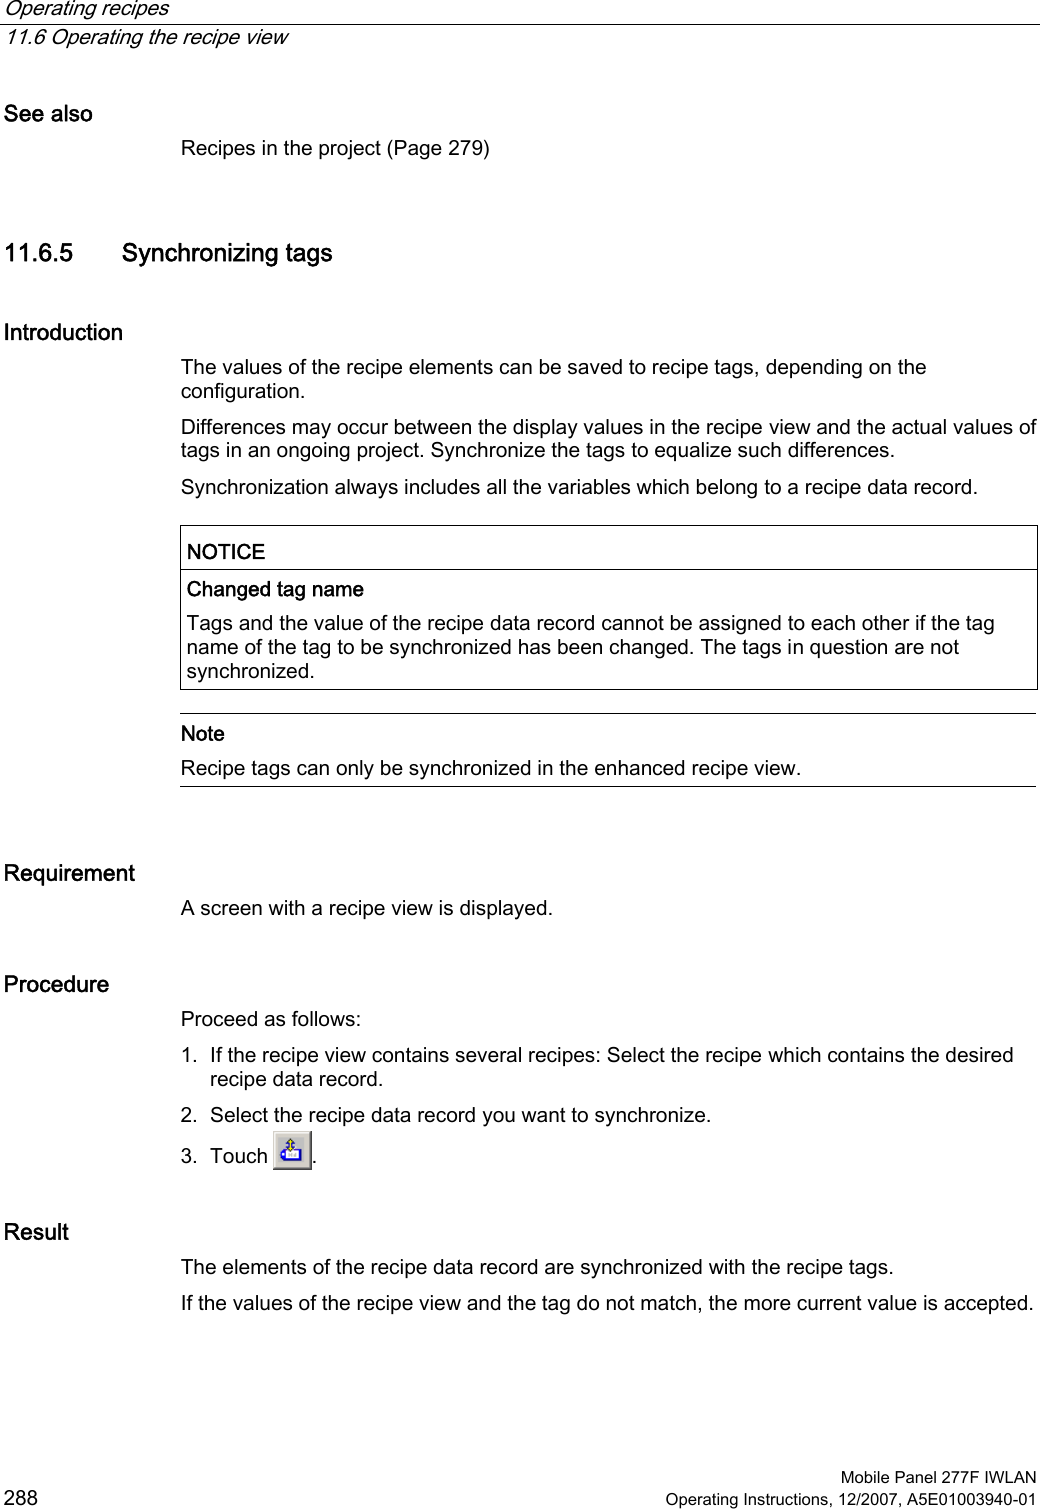 Operating recipes   11.6 Operating the recipe view  Mobile Panel 277F IWLAN 288 Operating Instructions, 12/2007, A5E01003940-01 See also Recipes in the project (Page 279) 11.6.5 Synchronizing tags Introduction The values of the recipe elements can be saved to recipe tags, depending on the configuration.  Differences may occur between the display values in the recipe view and the actual values of tags in an ongoing project. Synchronize the tags to equalize such differences. Synchronization always includes all the variables which belong to a recipe data record.  NOTICE  Changed tag name Tags and the value of the recipe data record cannot be assigned to each other if the tag name of the tag to be synchronized has been changed. The tags in question are not synchronized.   Note Recipe tags can only be synchronized in the enhanced recipe view.  Requirement A screen with a recipe view is displayed. Procedure Proceed as follows: 1. If the recipe view contains several recipes: Select the recipe which contains the desired recipe data record. 2. Select the recipe data record you want to synchronize. 3. Touch  . Result The elements of the recipe data record are synchronized with the recipe tags.  If the values of the recipe view and the tag do not match, the more current value is accepted.  